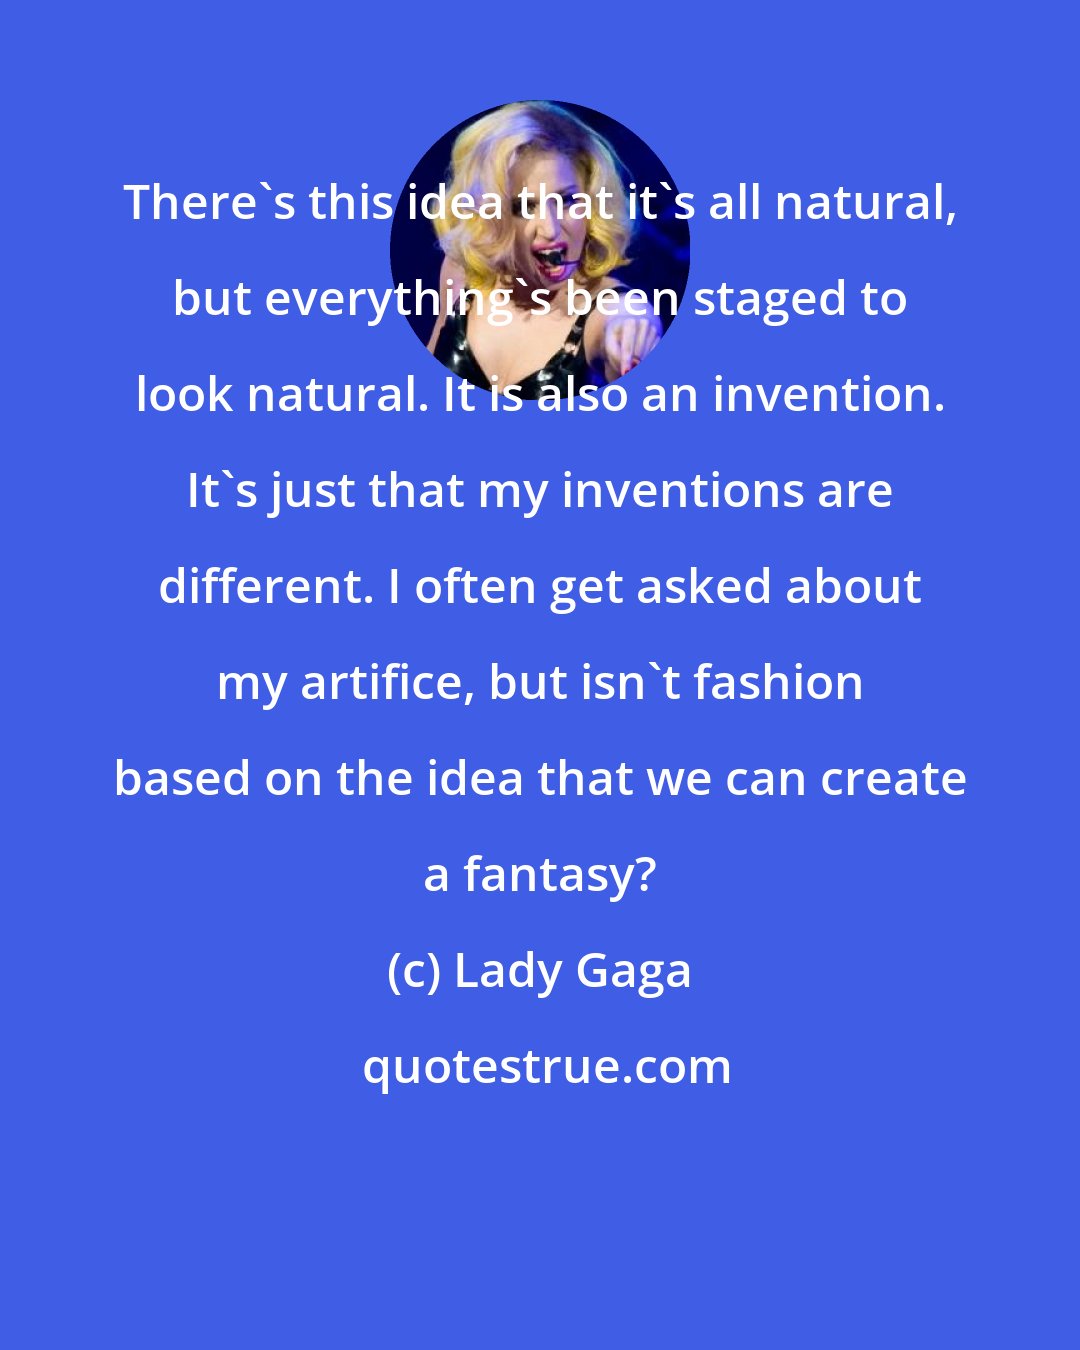 Lady Gaga: There's this idea that it's all natural, but everything's been staged to look natural. It is also an invention. It's just that my inventions are different. I often get asked about my artifice, but isn't fashion based on the idea that we can create a fantasy?